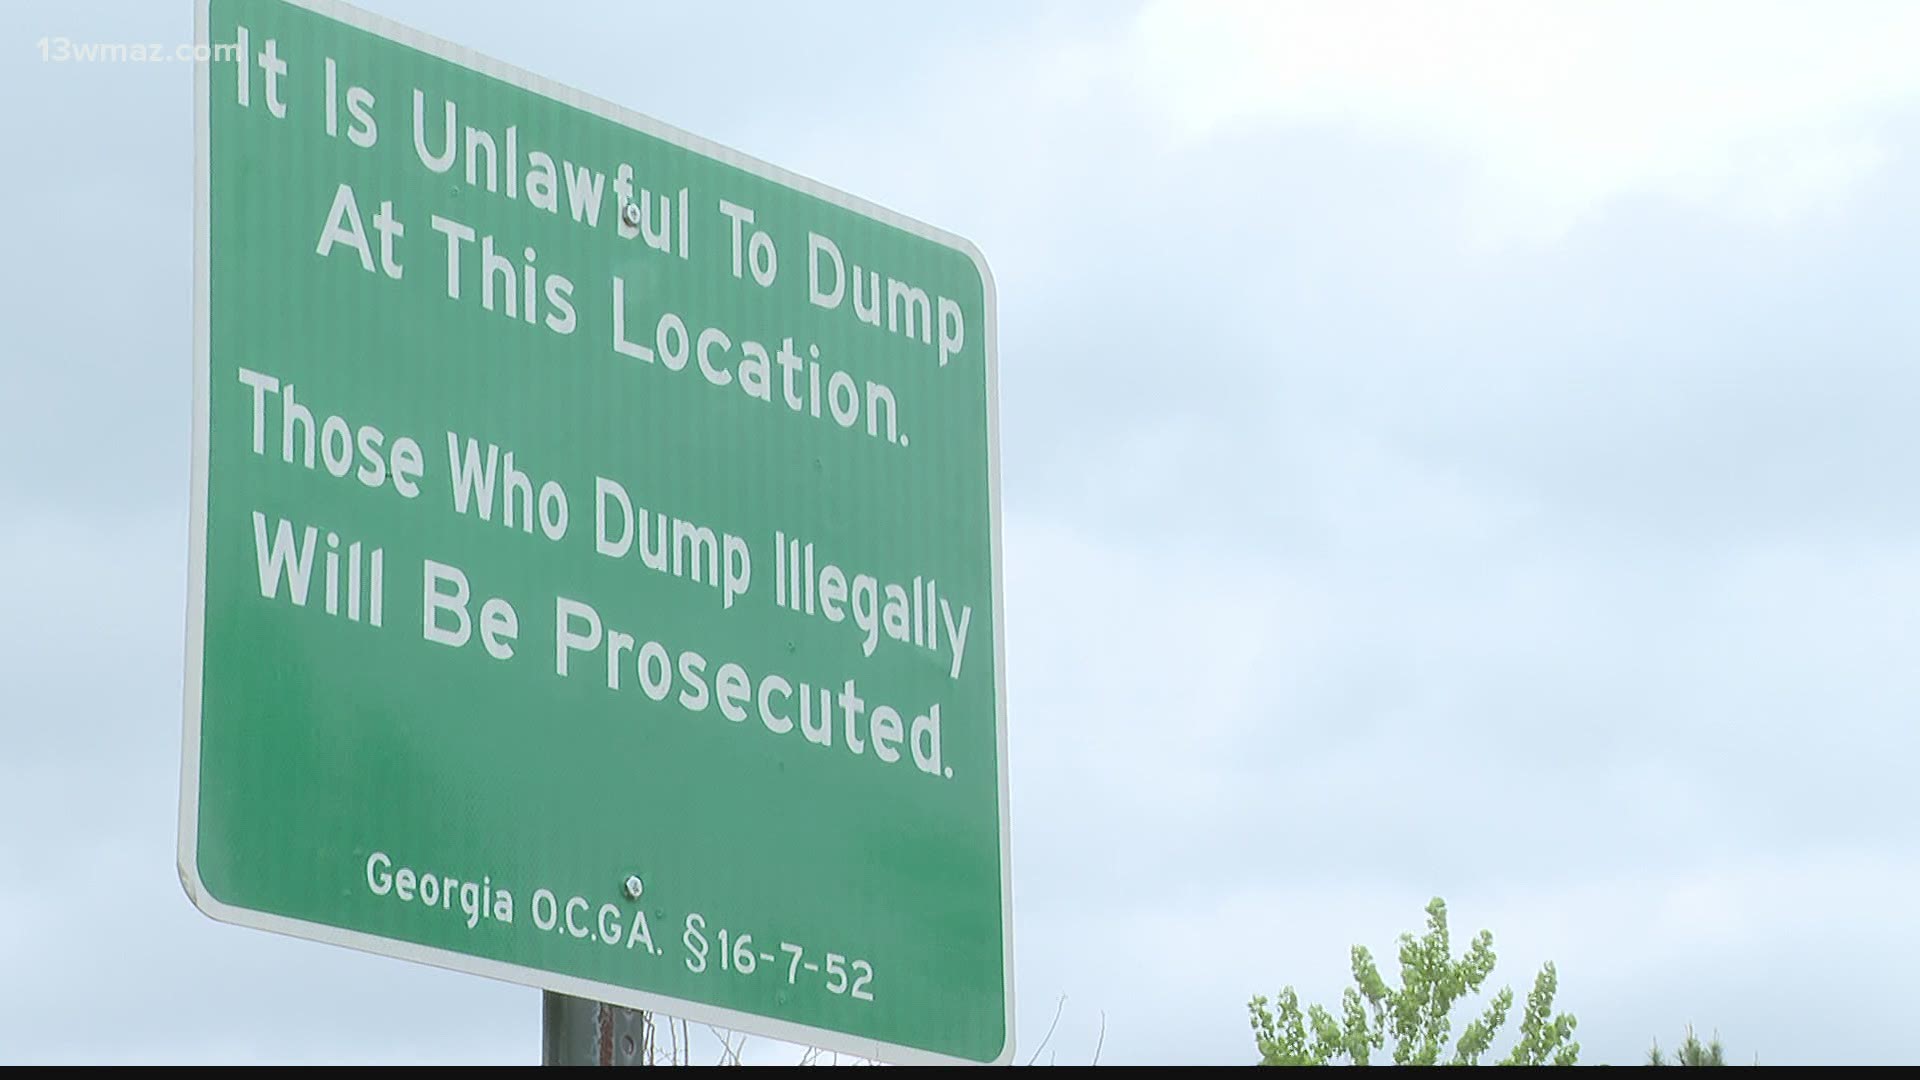 People in one Baldwin County neighborhood say they've been trying for years to get illegally-dumped waste removed.